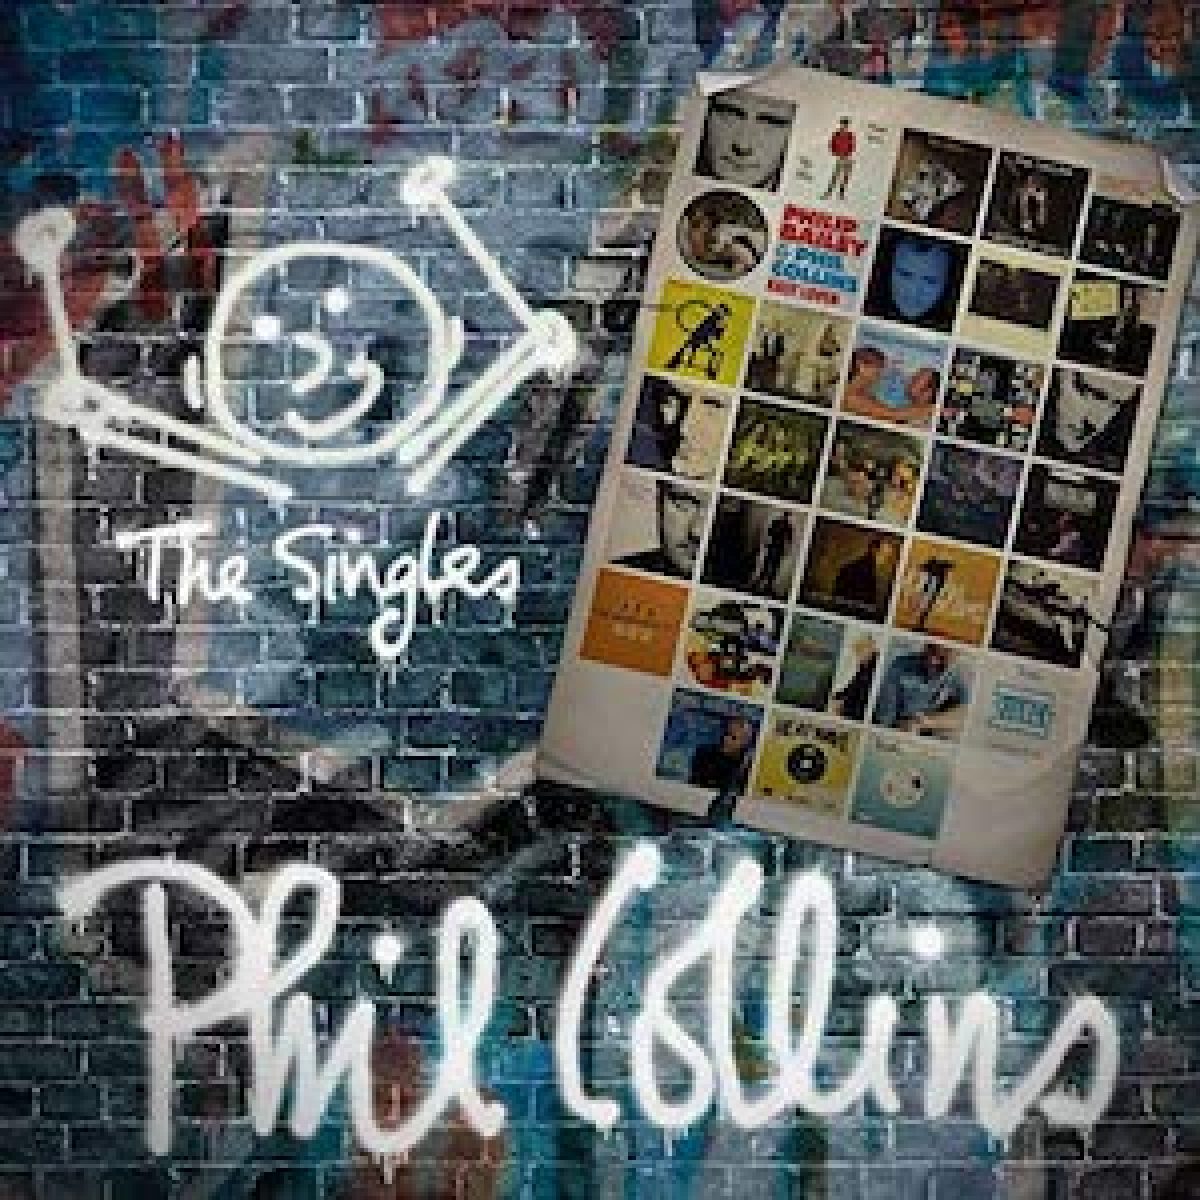 Phil Collins, The SIngles